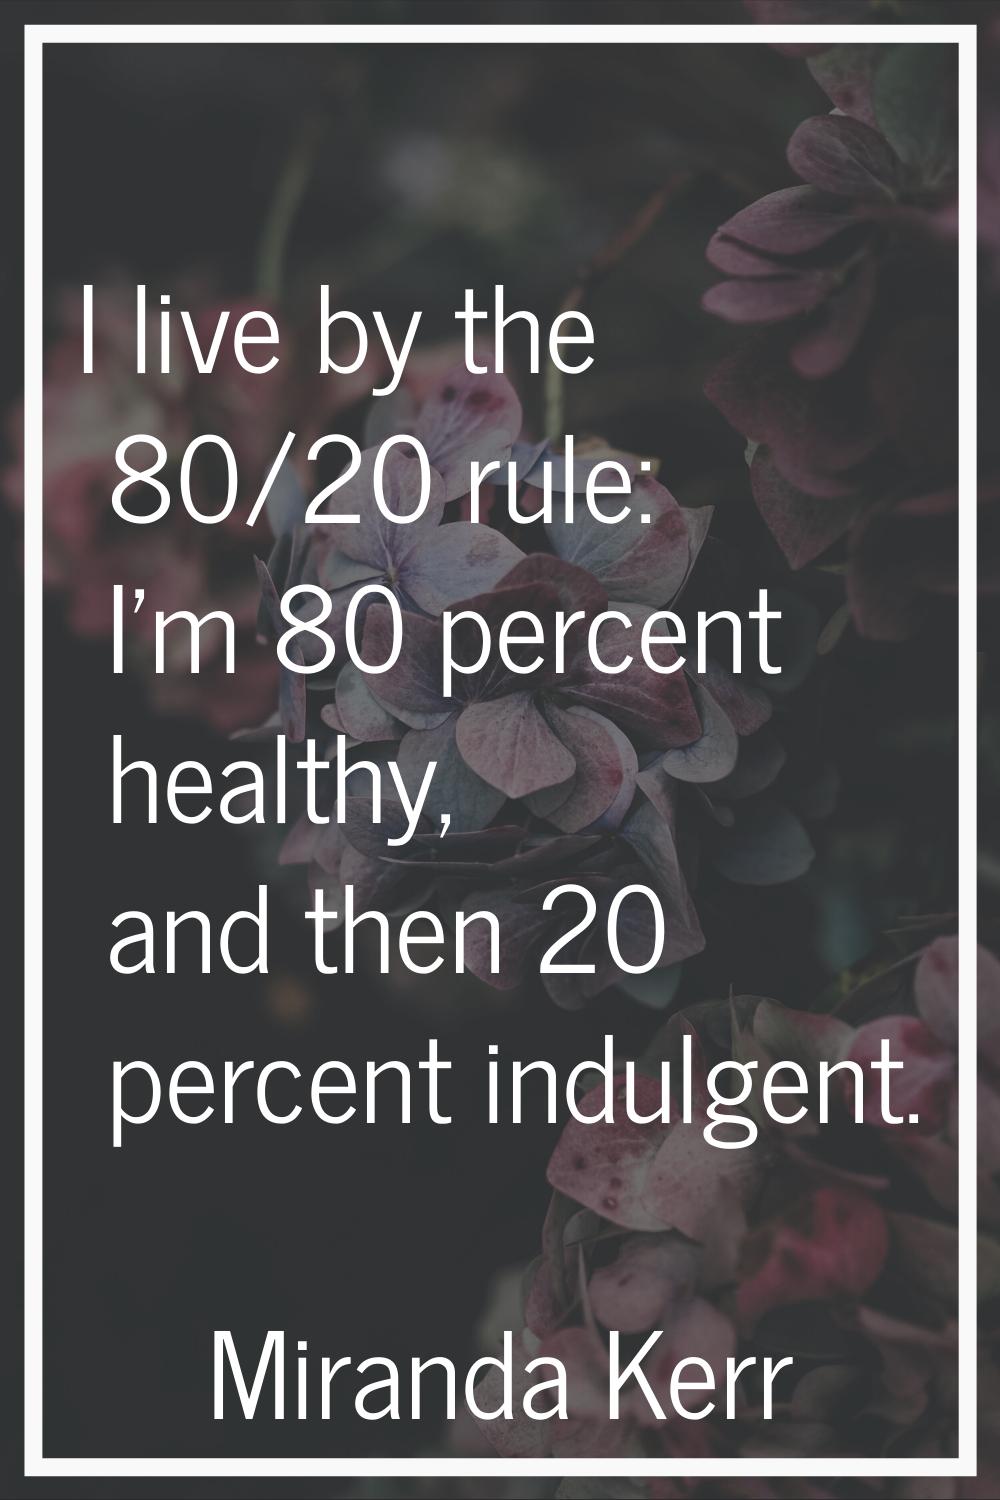 I live by the 80/20 rule: I'm 80 percent healthy, and then 20 percent indulgent.